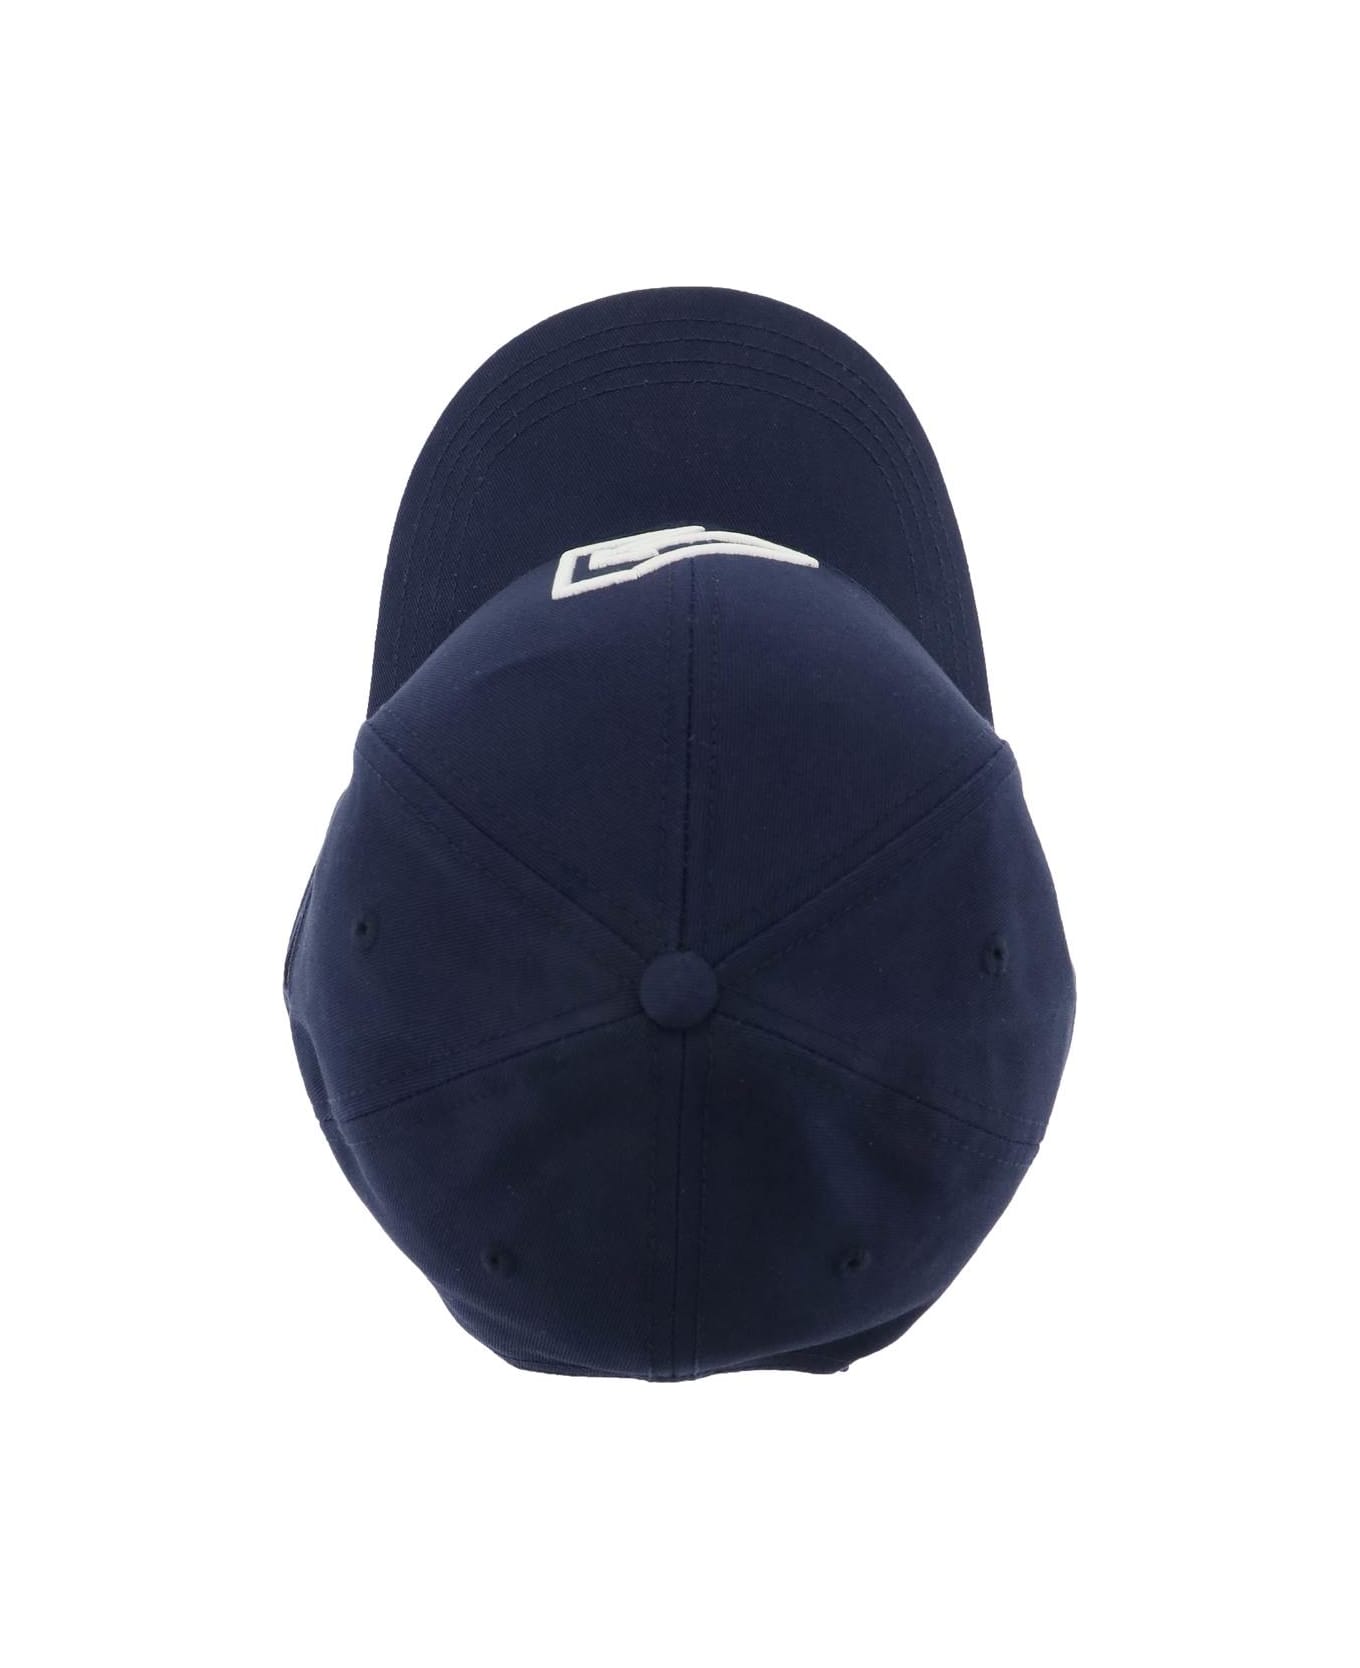 Autry Baseball Cap With Embroidered Logo - BLUE PATCH (Blue)